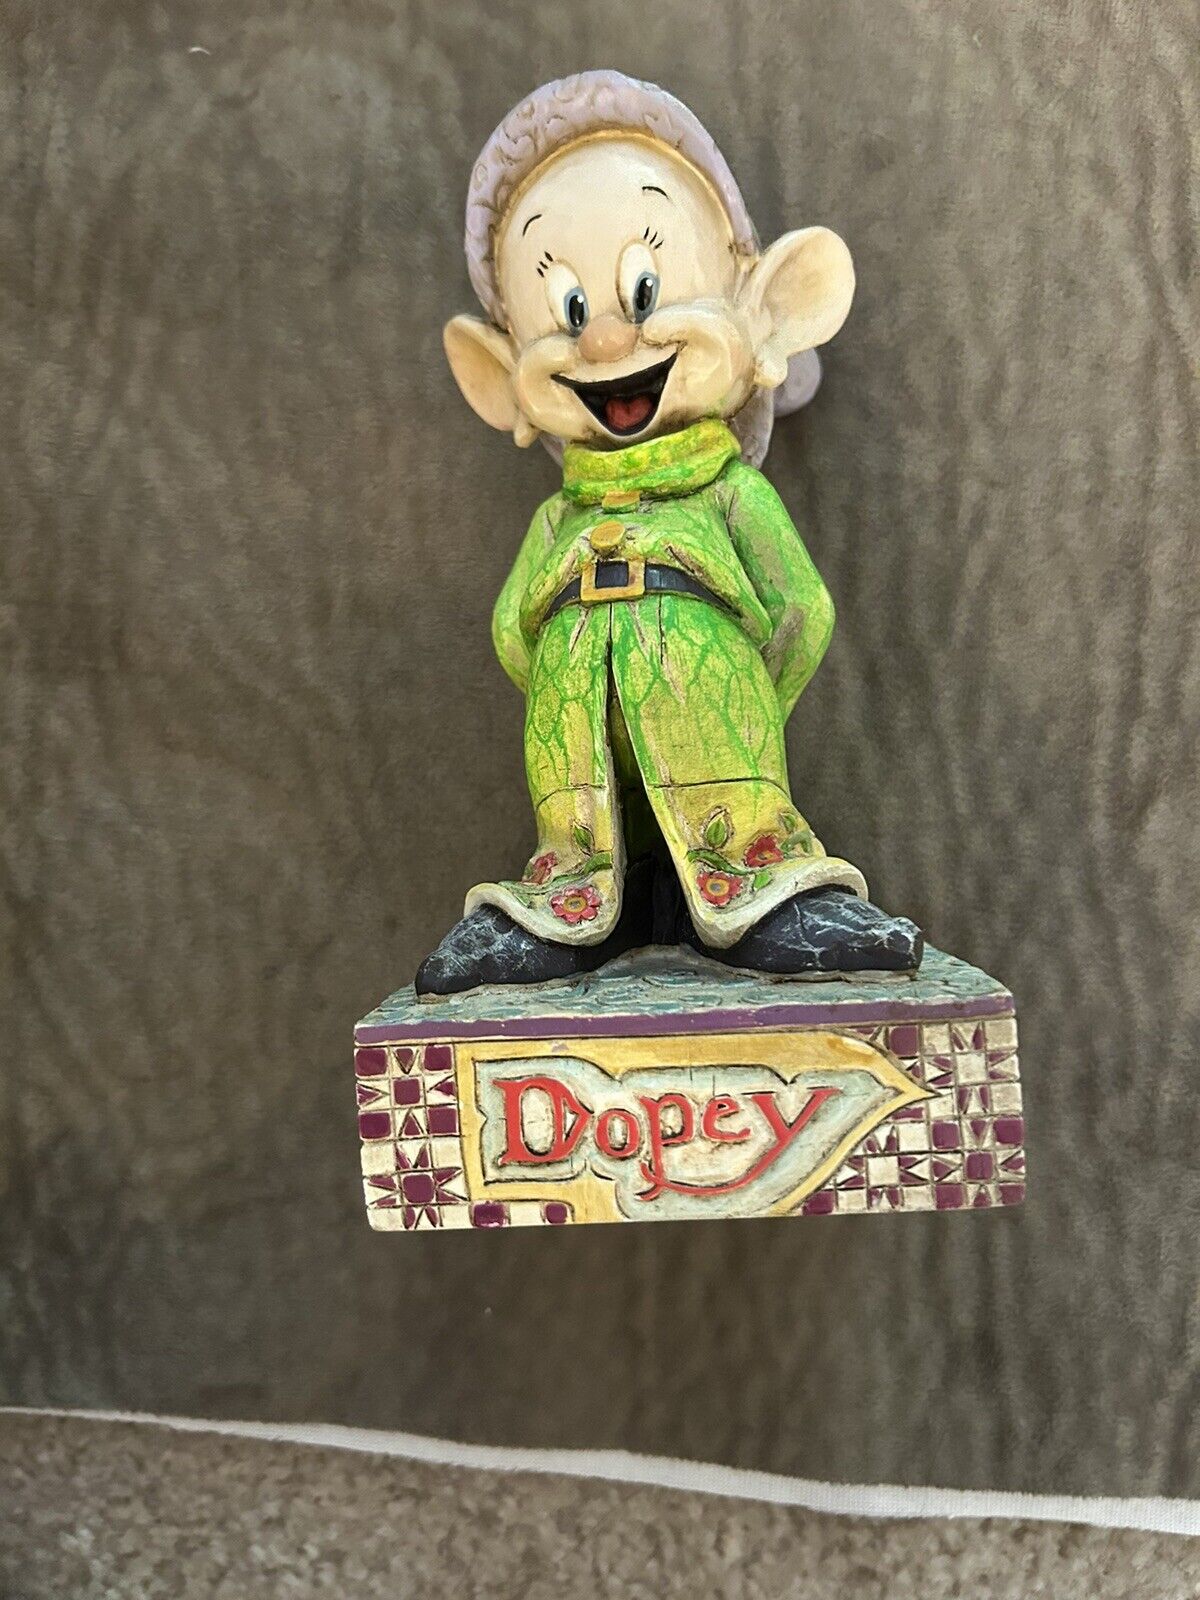 Jim Shore Disney Traditions Dopey “Simply adorable” 7” Tall